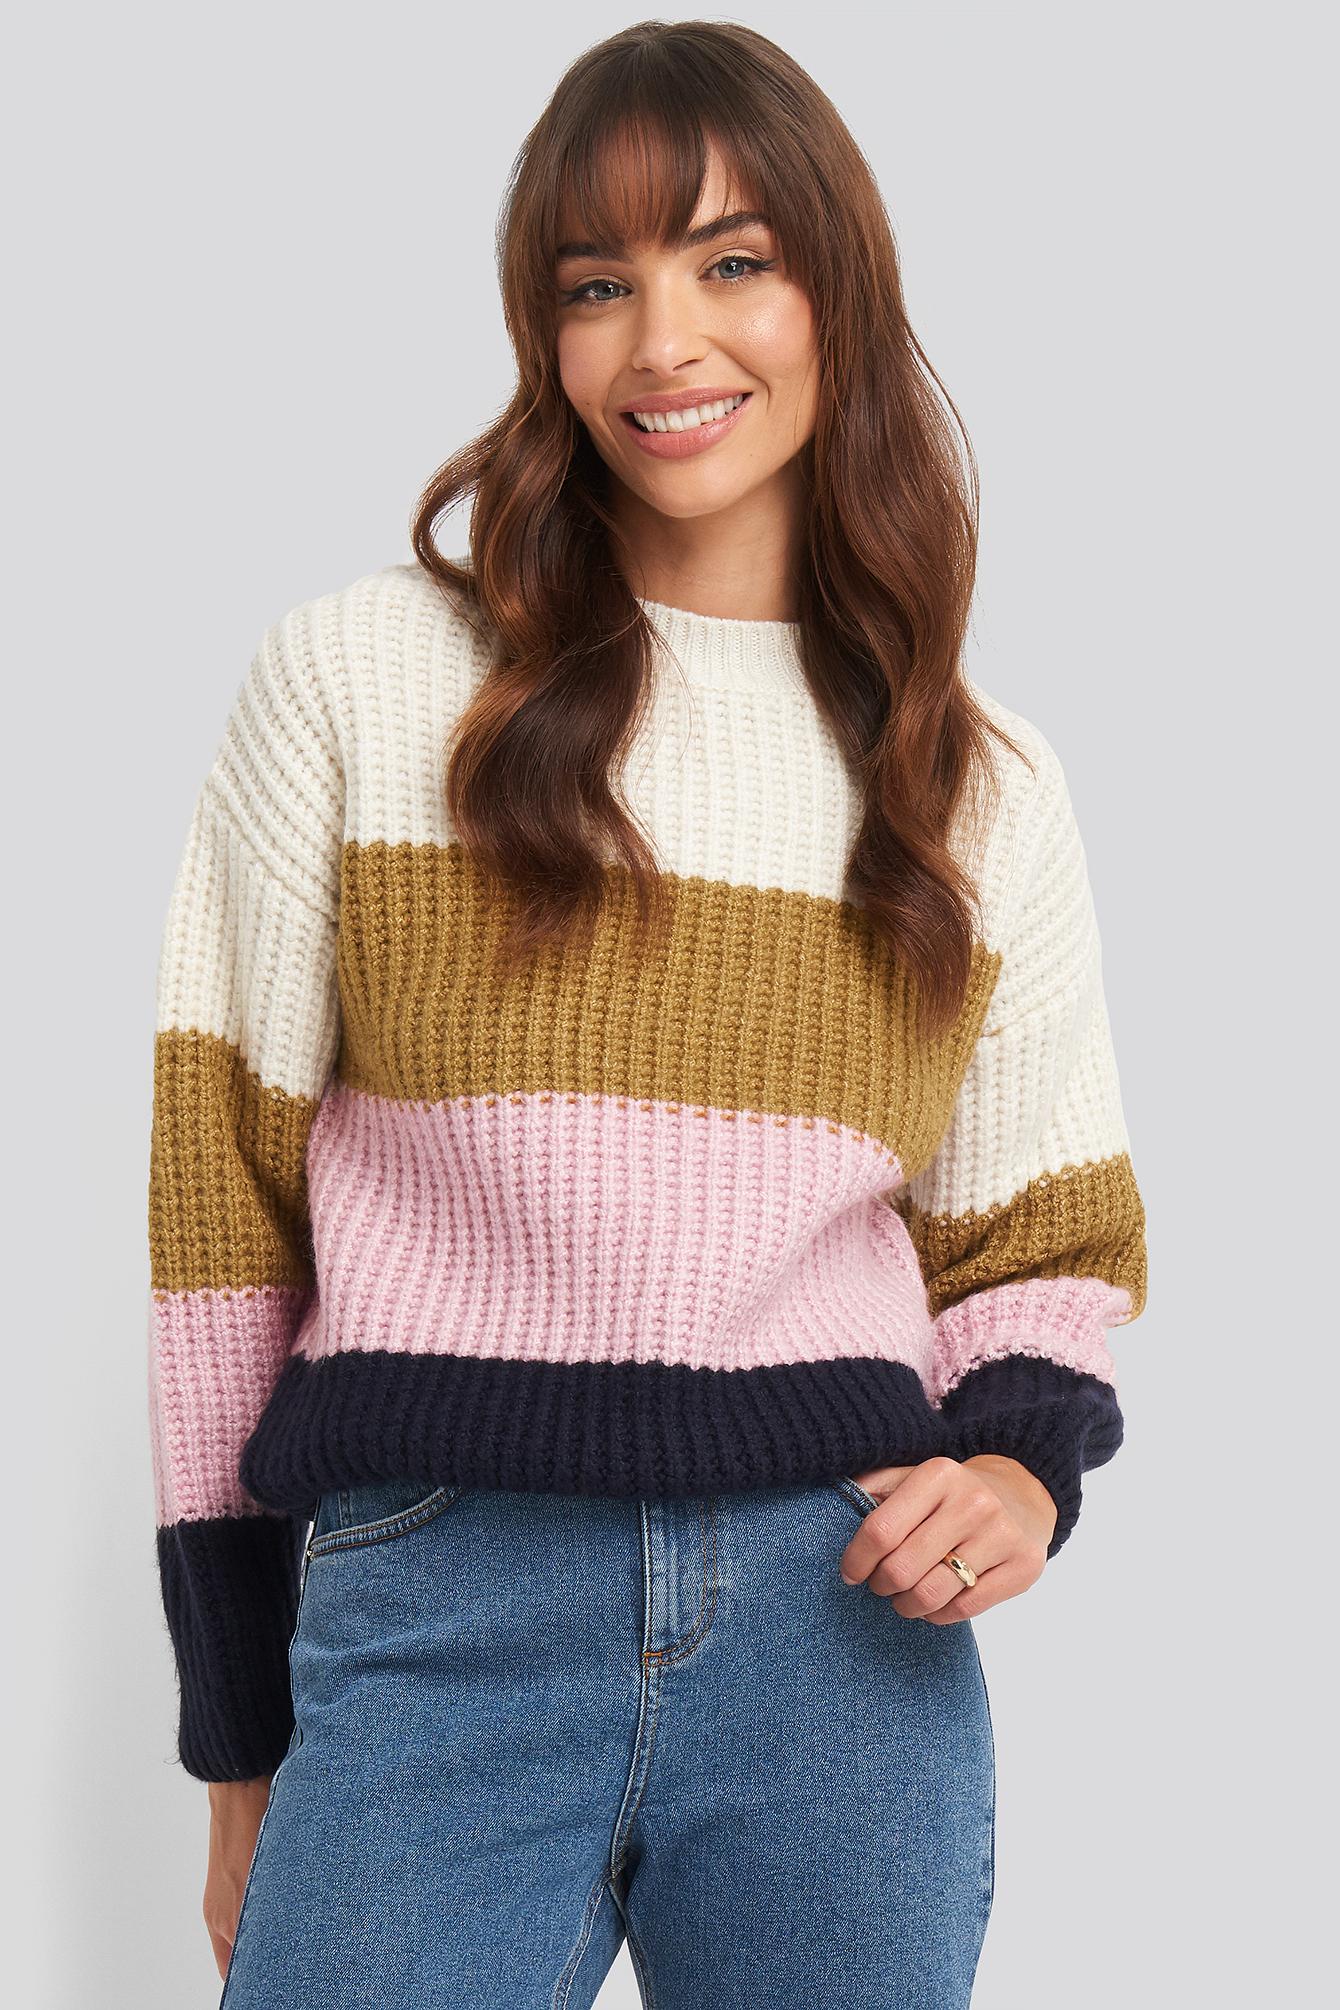 Mango Synthetic Multicolor Rainbow Sweater in Navy (Blue) - Lyst